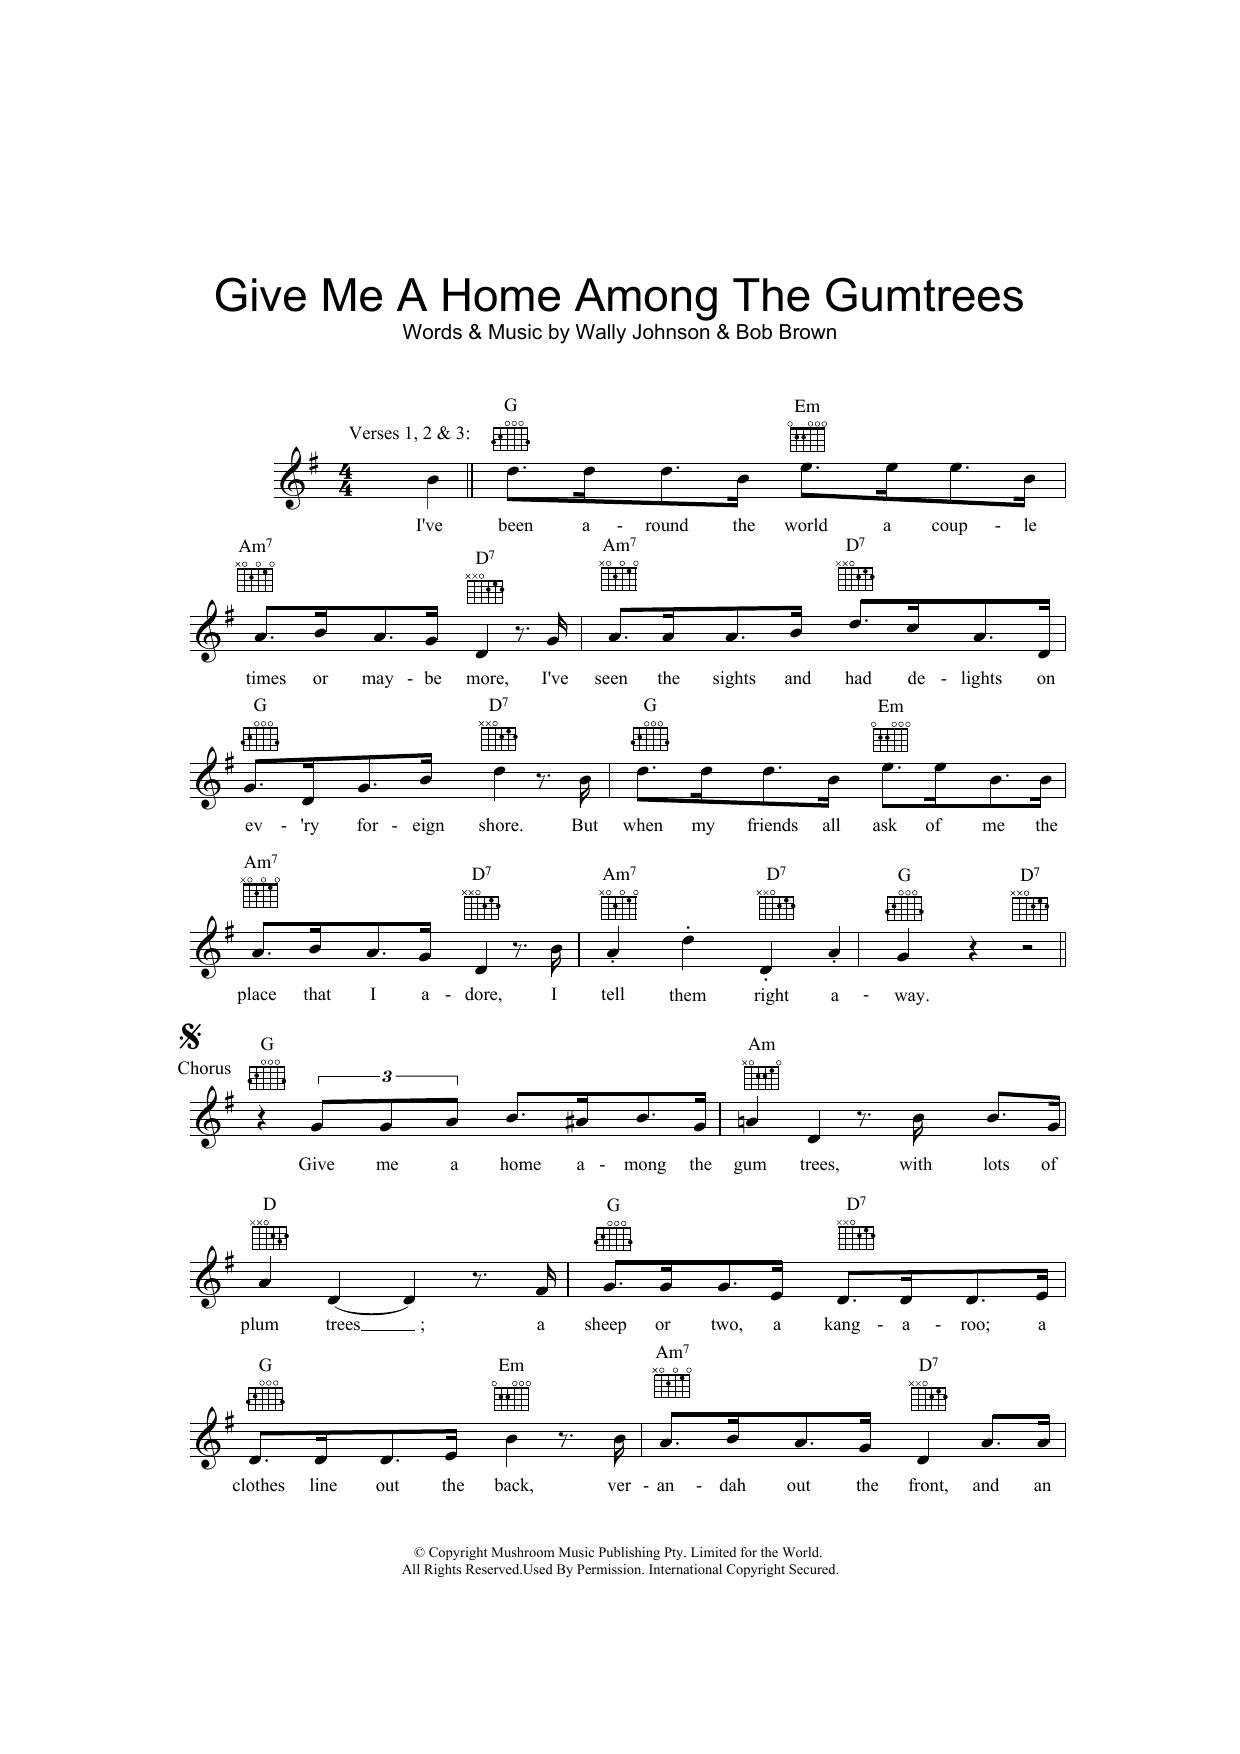 Download Wally Johnson Give Me A Home Among The Gumtrees Sheet Music